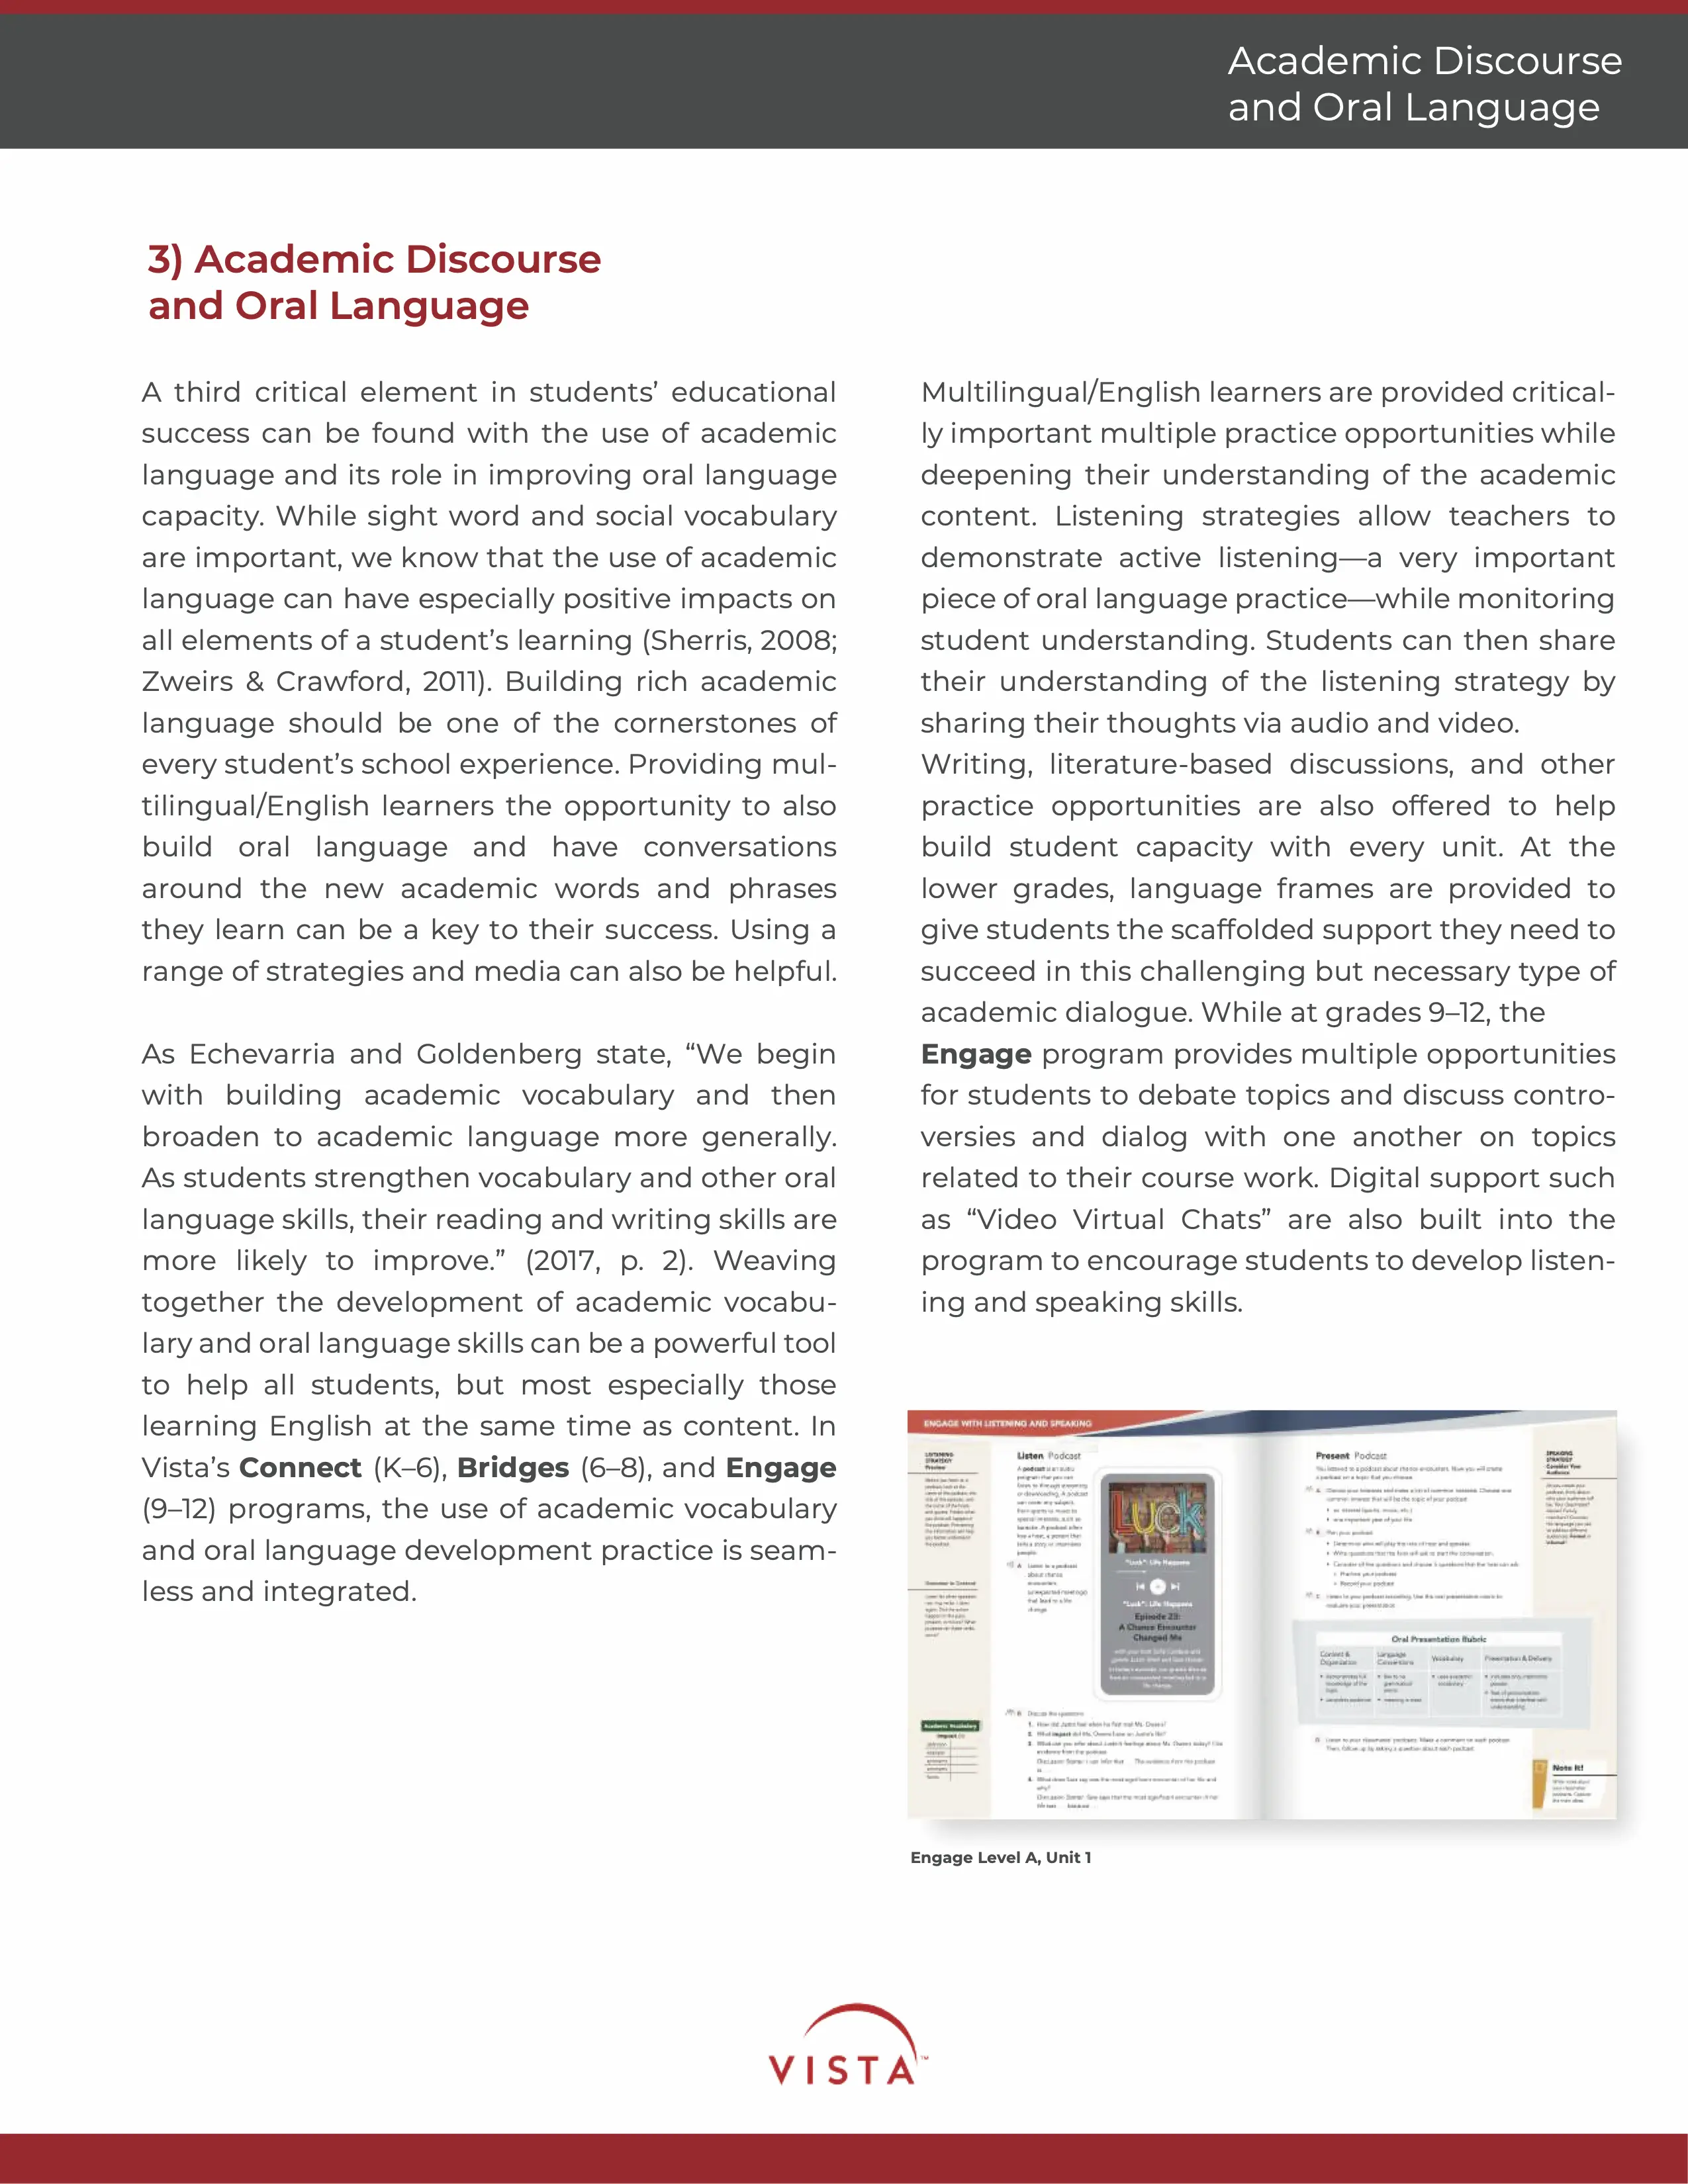 Mastering Language and Literacy through High-interest Content Page 4